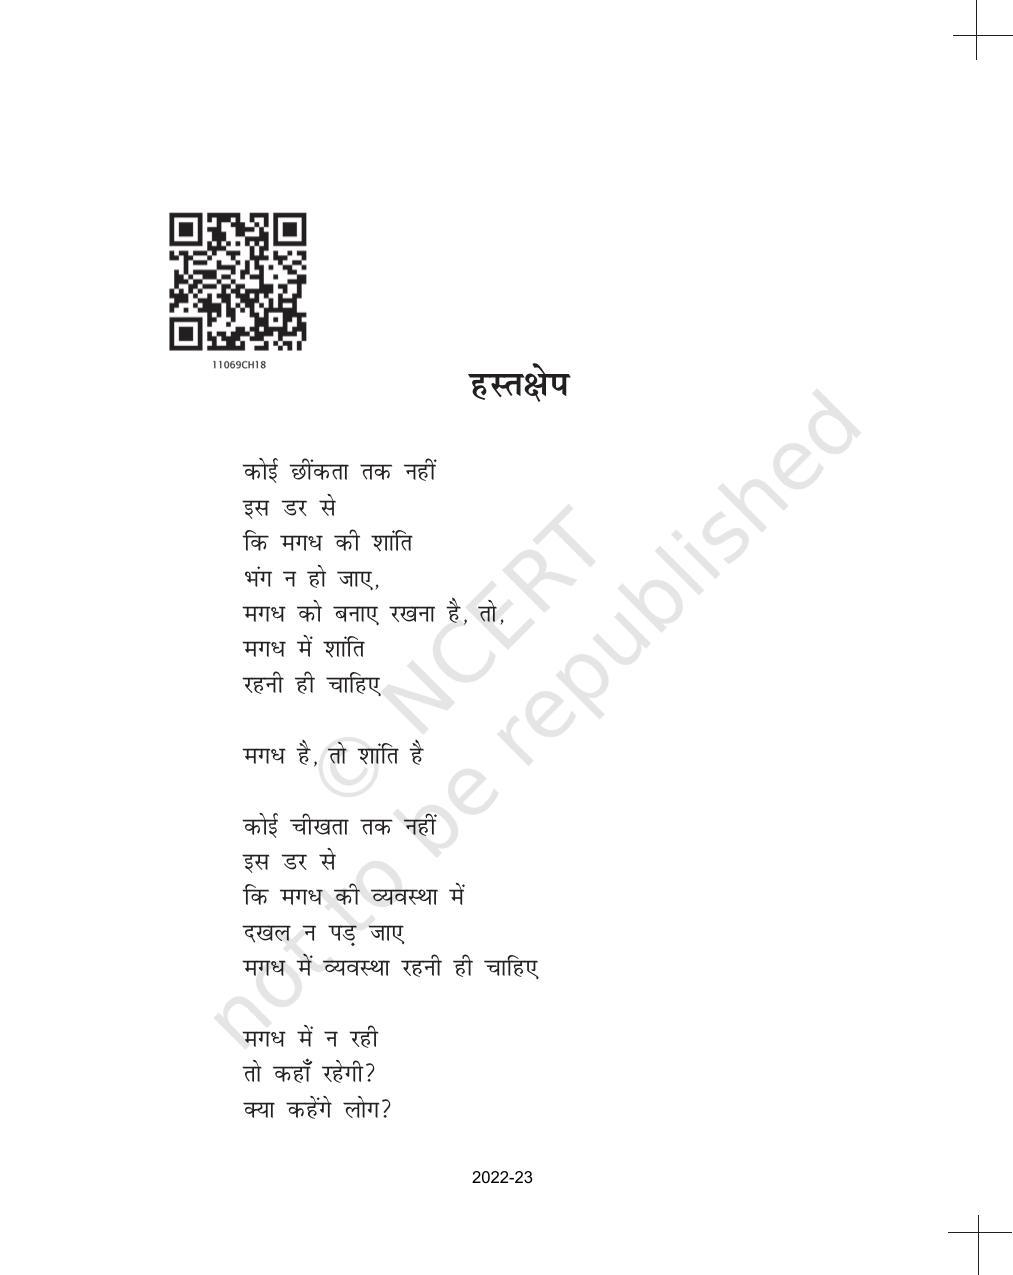 NCERT Book for Class 11 Hindi Antra Chapter 18 श्रीकांत वर्मा - Page 3